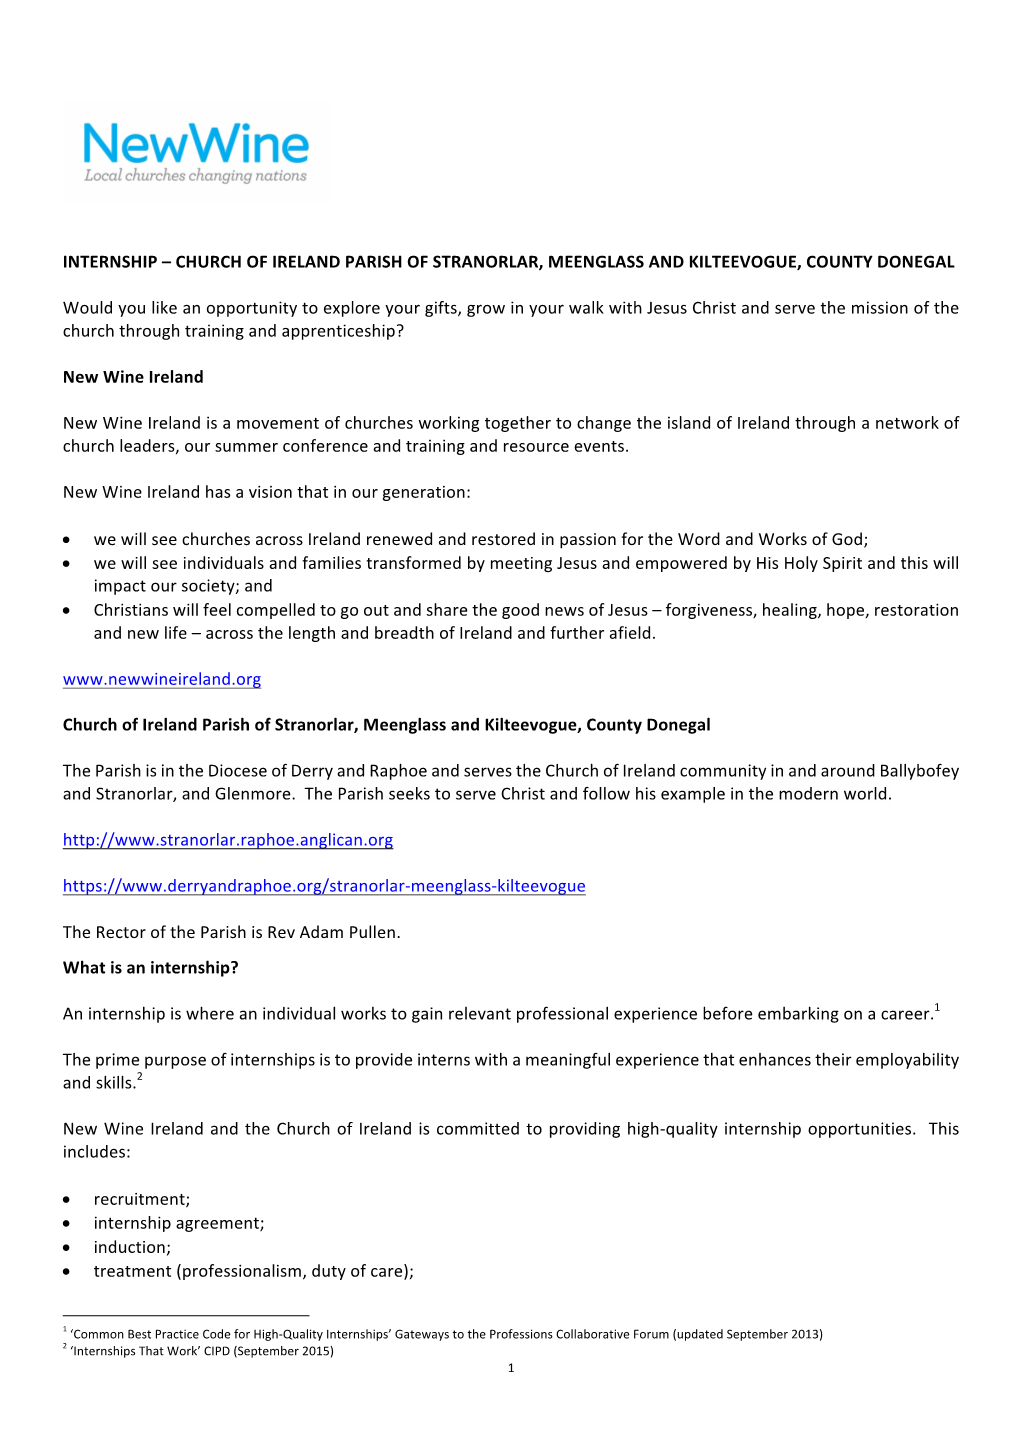 INTERNSHIP – CHURCH of IRELAND PARISH of STRANORLAR, MEENGLASS and KILTEEVOGUE, COUNTY DONEGAL Would You Like an Opportunity